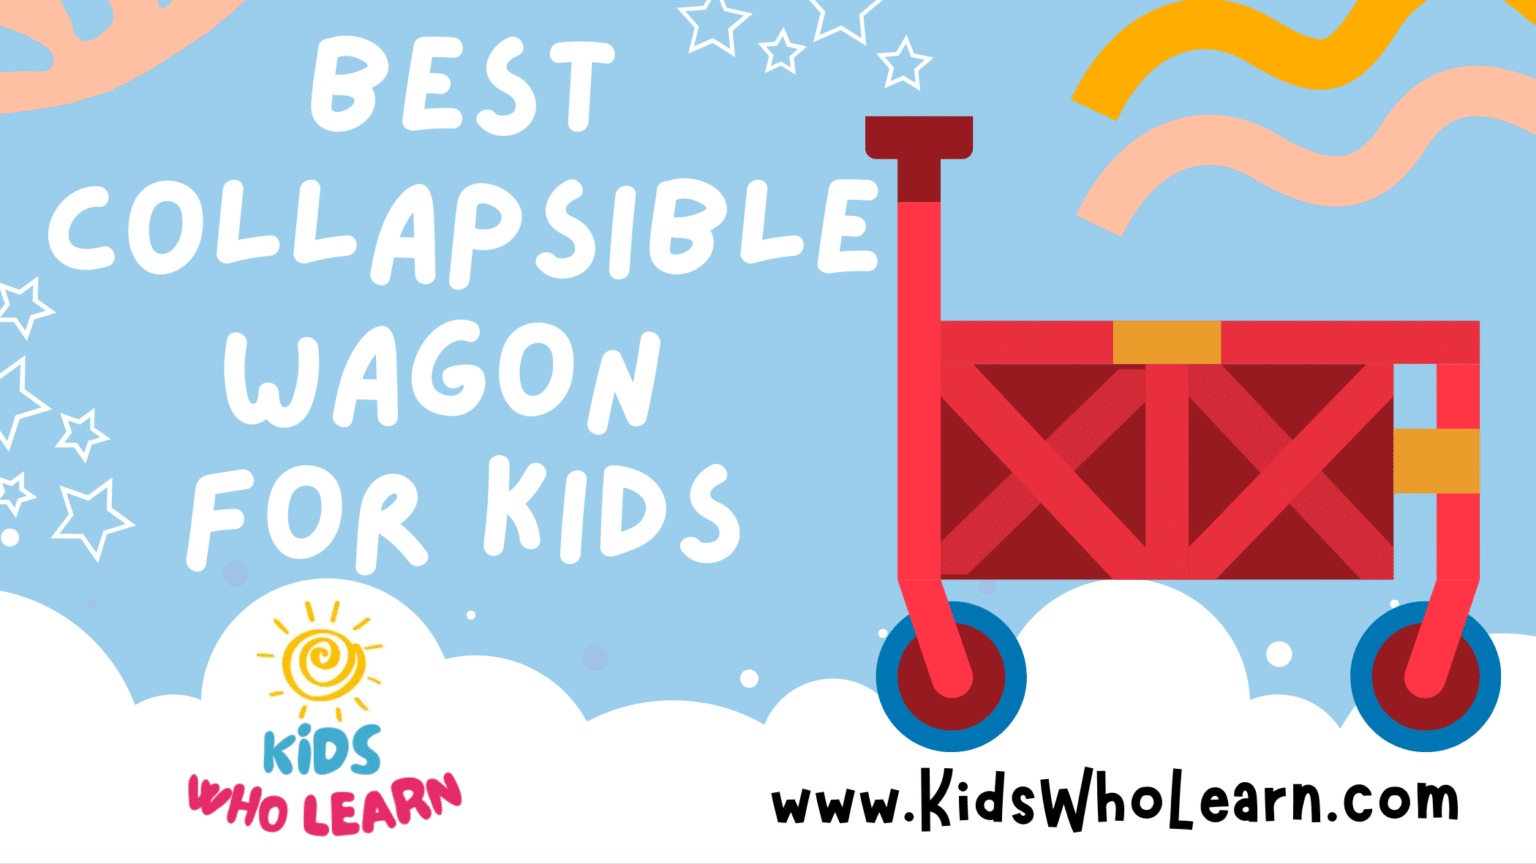 Best Collapsible Wagon For Kids